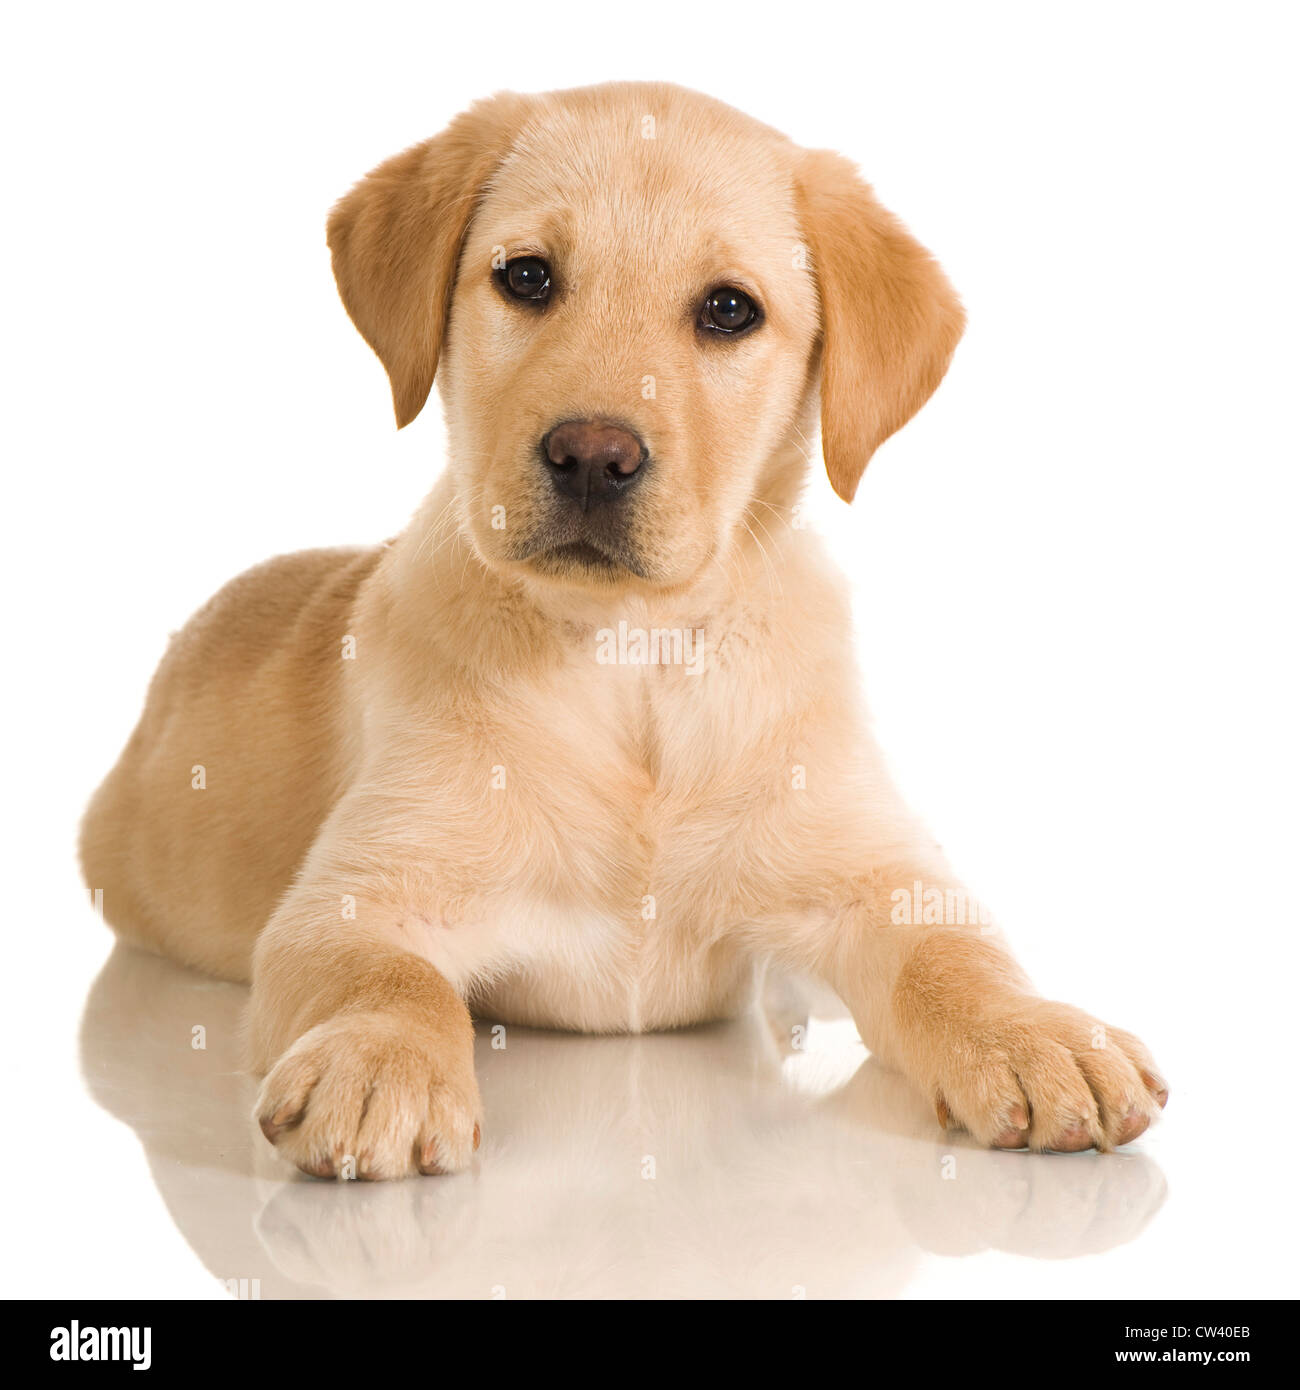 Labrador Retriever. Yellow puppy lying  Studio picture against a white background Stock Photo